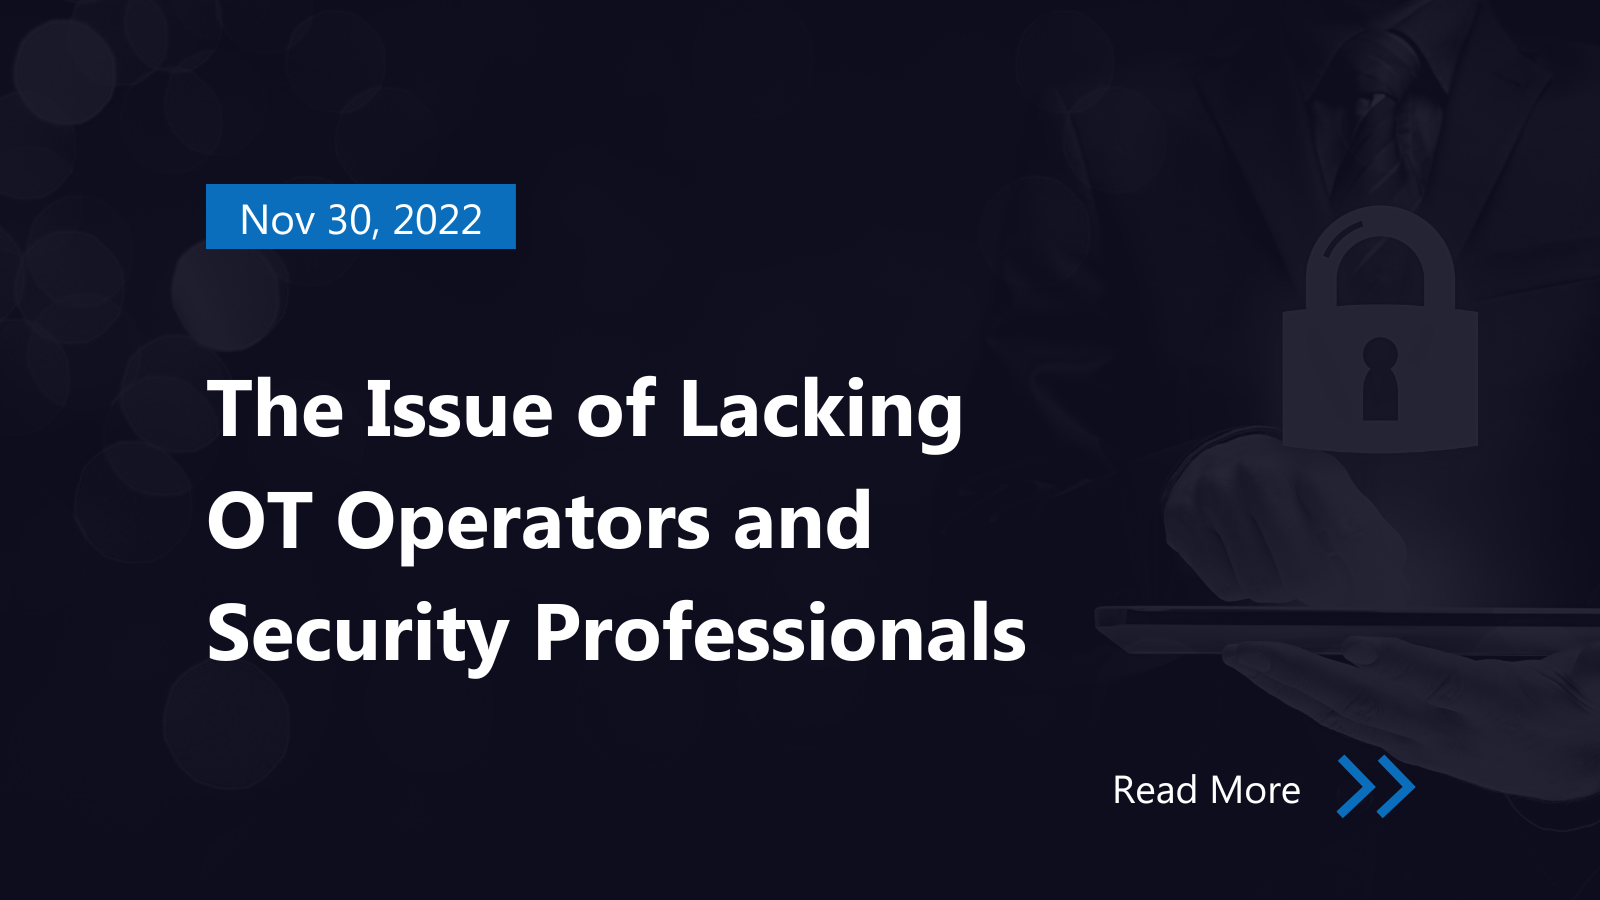 The issue of lacking OT operators and security professionals